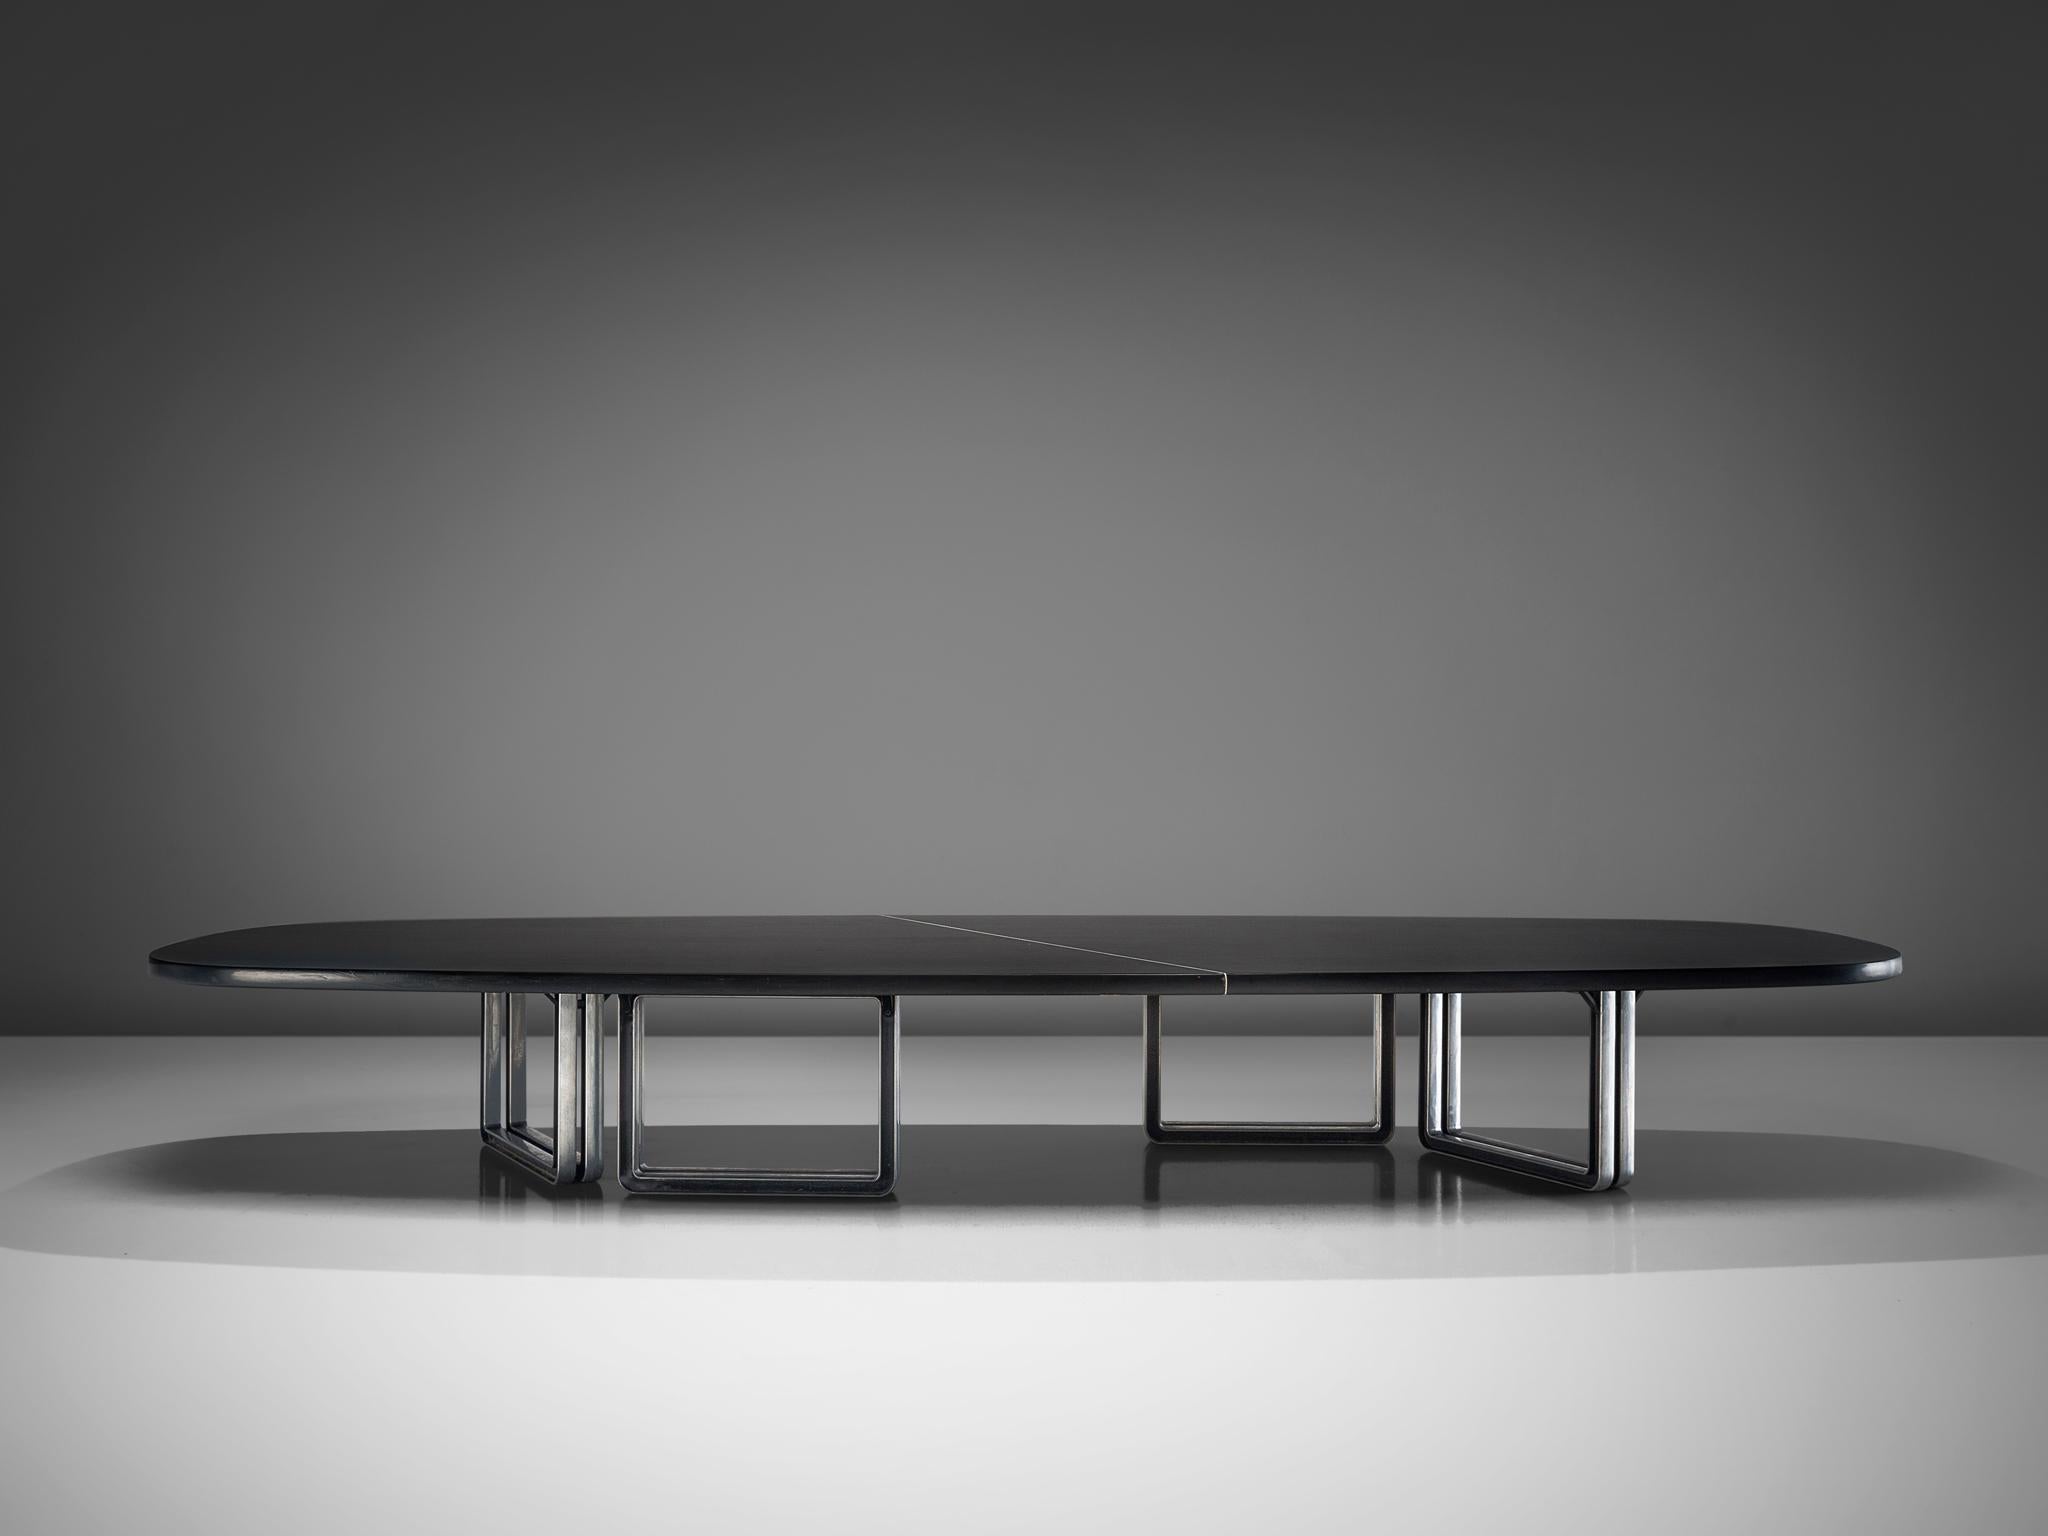 Osvaldo Borsani for Tecno, conference table, lacquered black wood, aluminum base, Italy, 1970s

Conference table with a black top designed by Osvaldo Borsani. The tabletop is composed of two black pieces connected via steel inserts. With the base